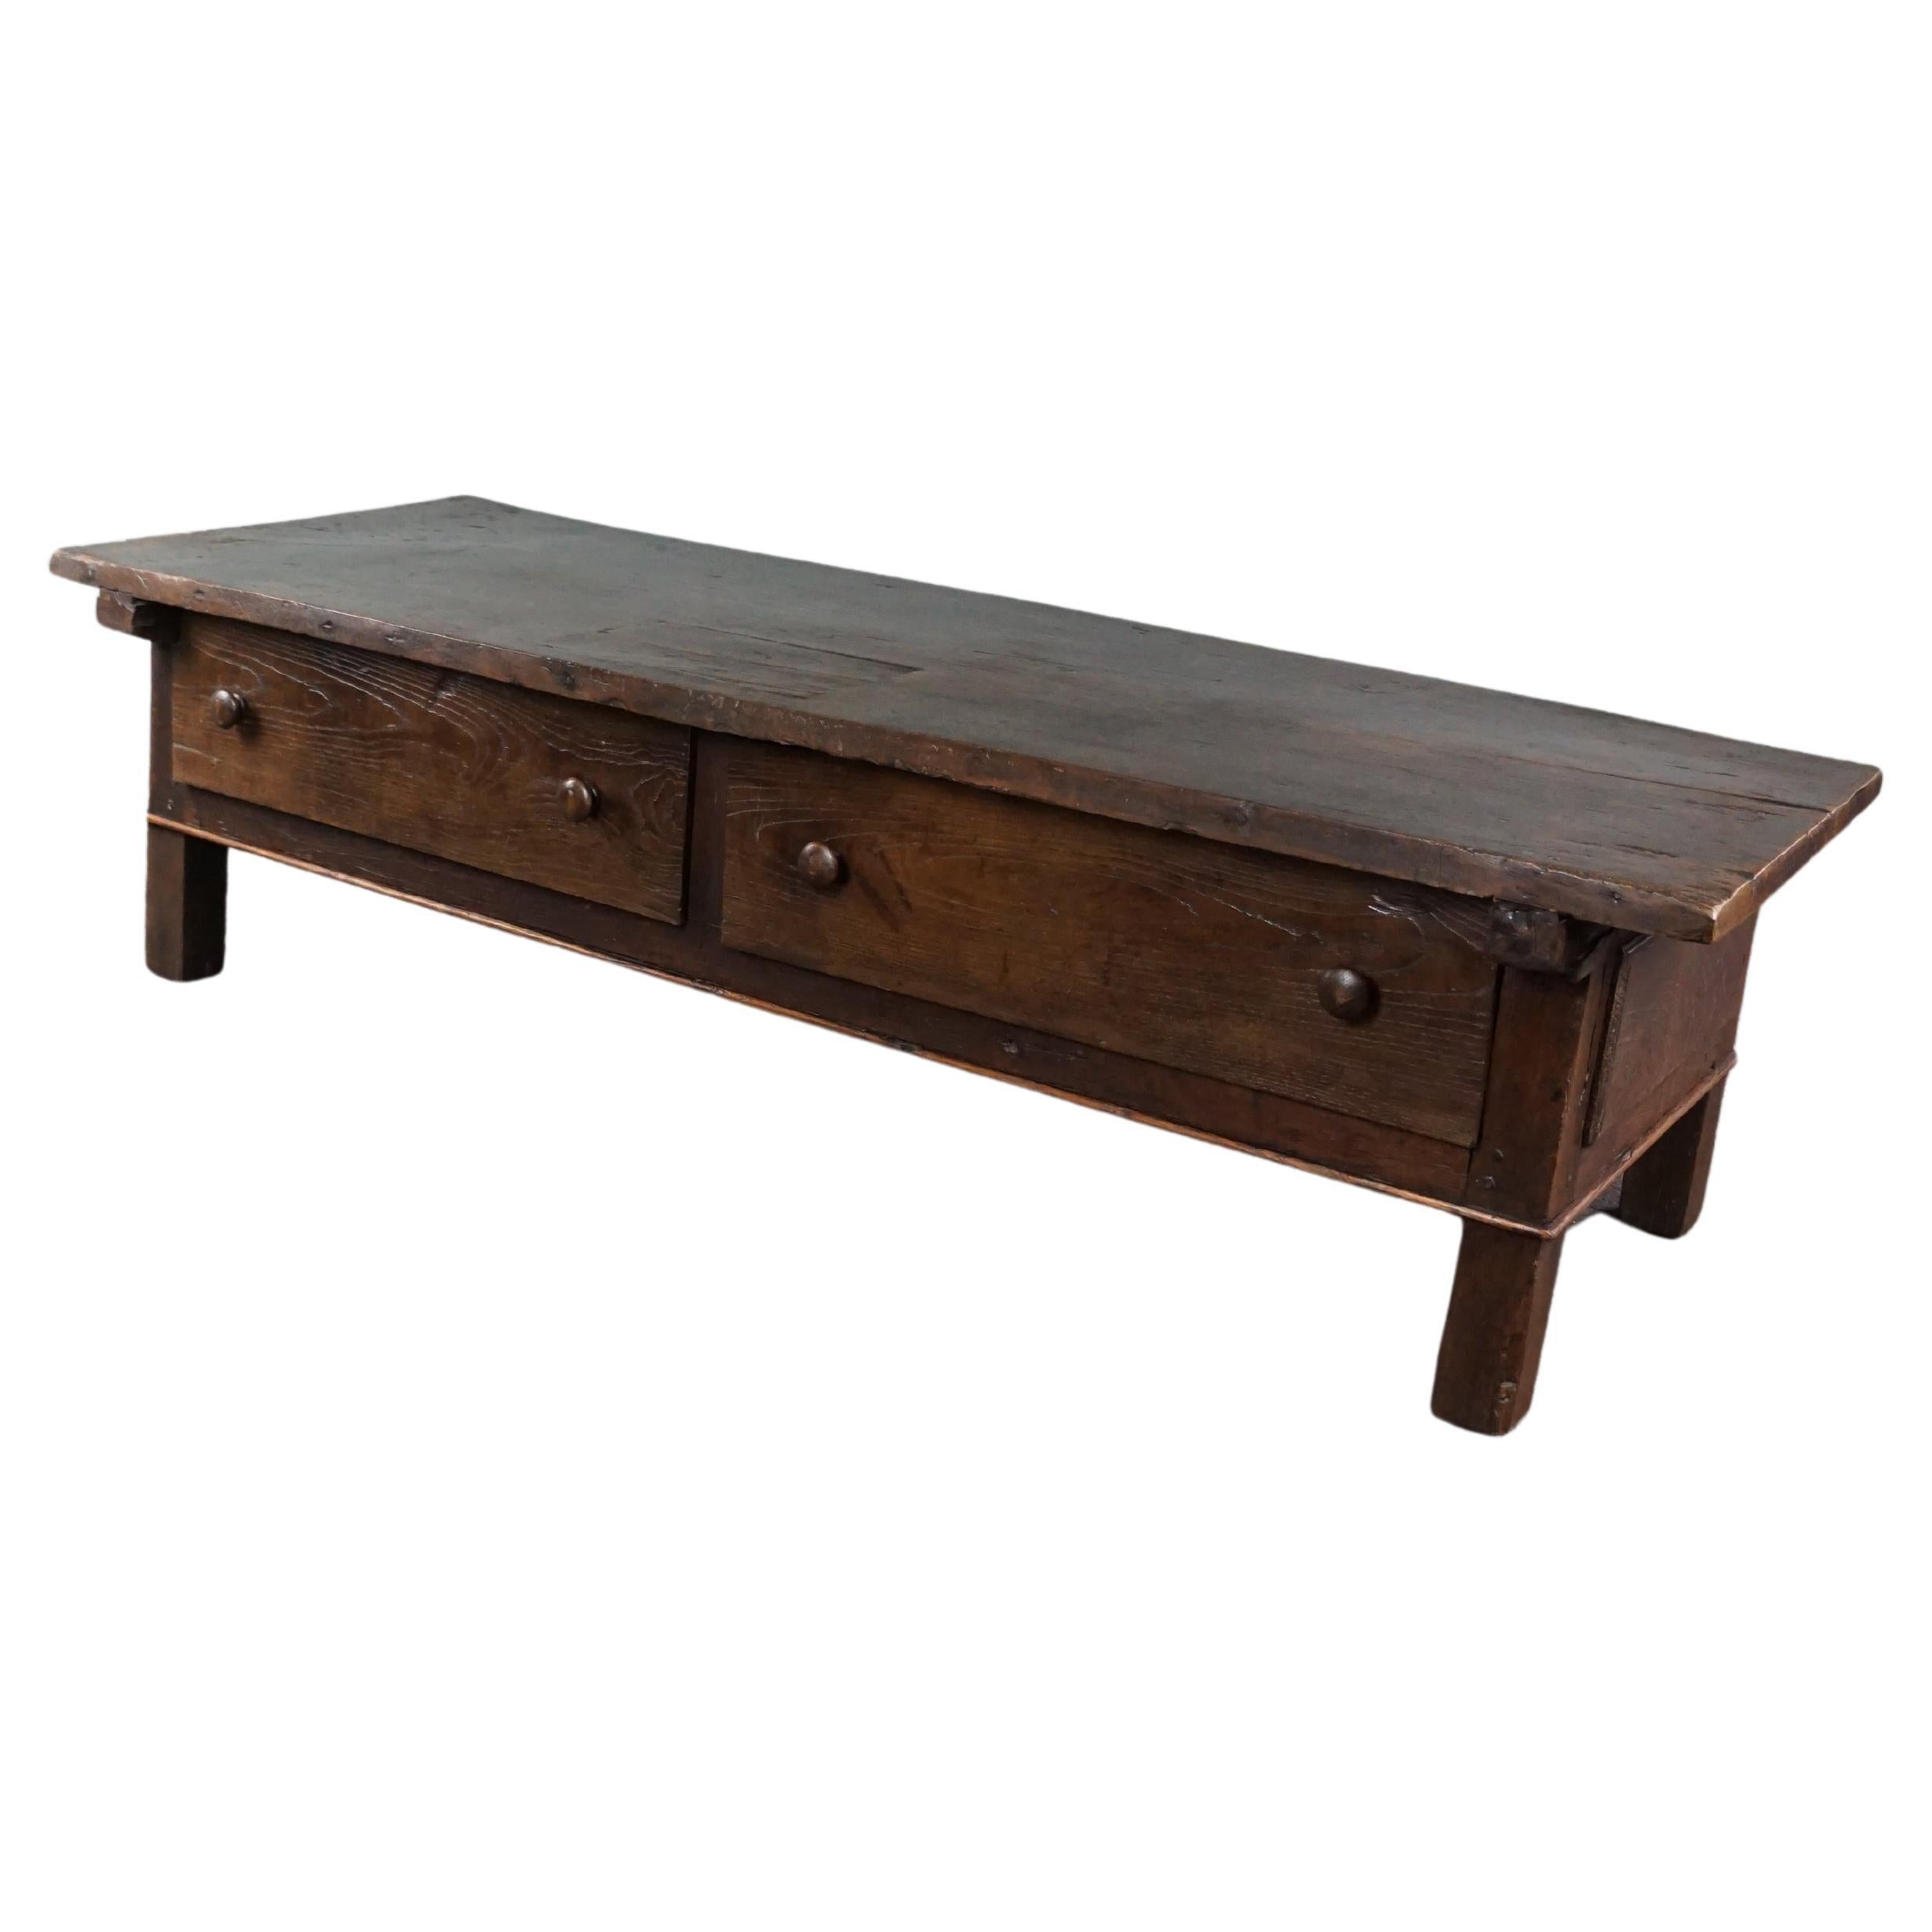 Extremely long antique French coffee table from the early 1800s